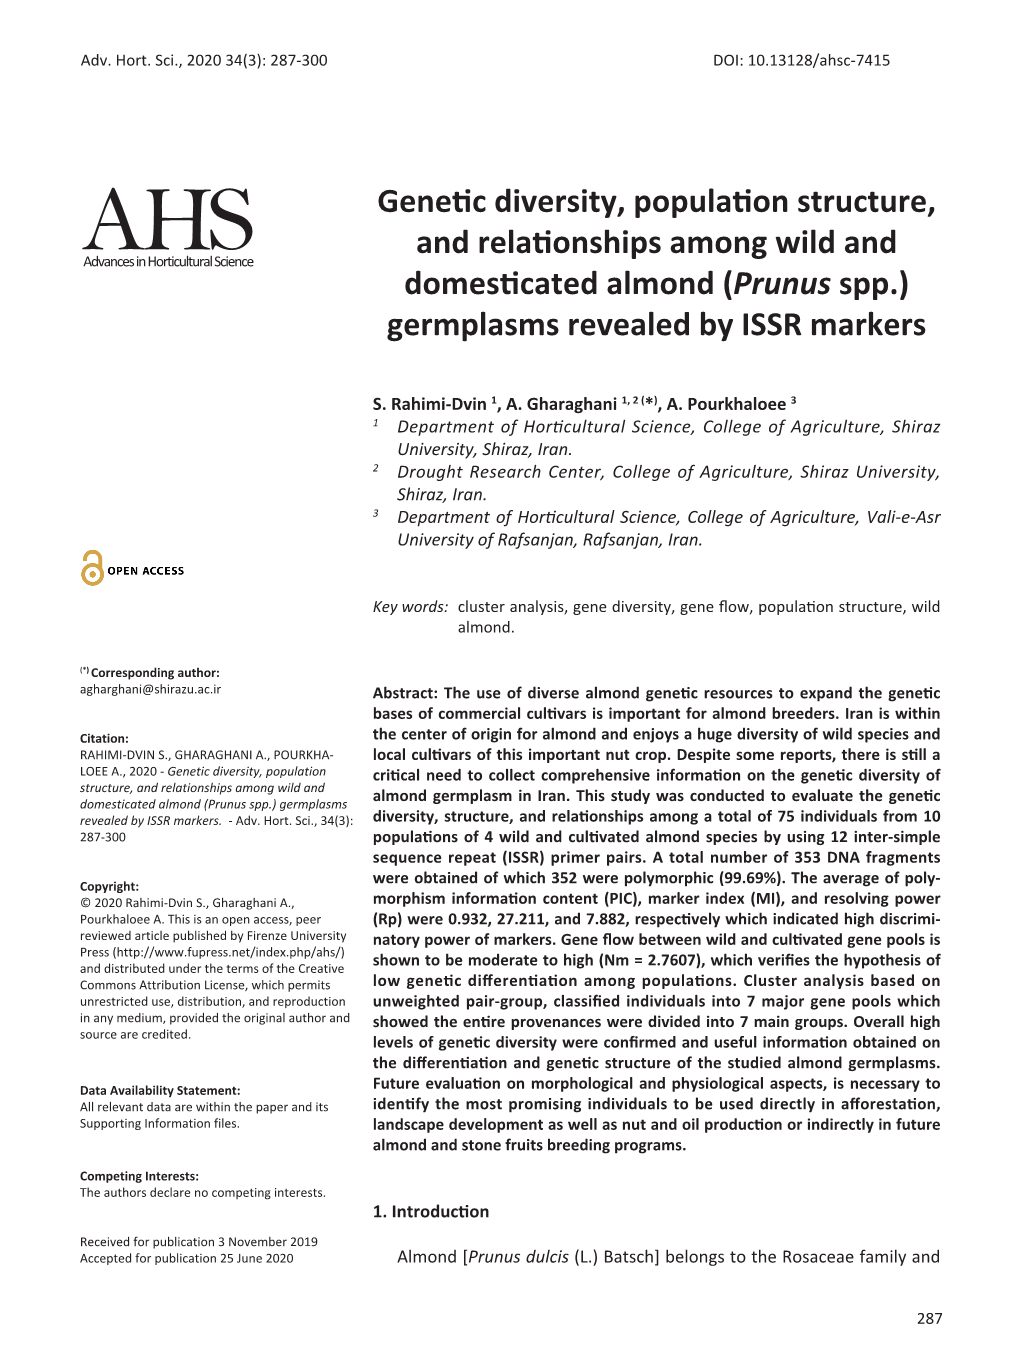 Genetic Diversity, Population Structure, and Relationships Among Wild